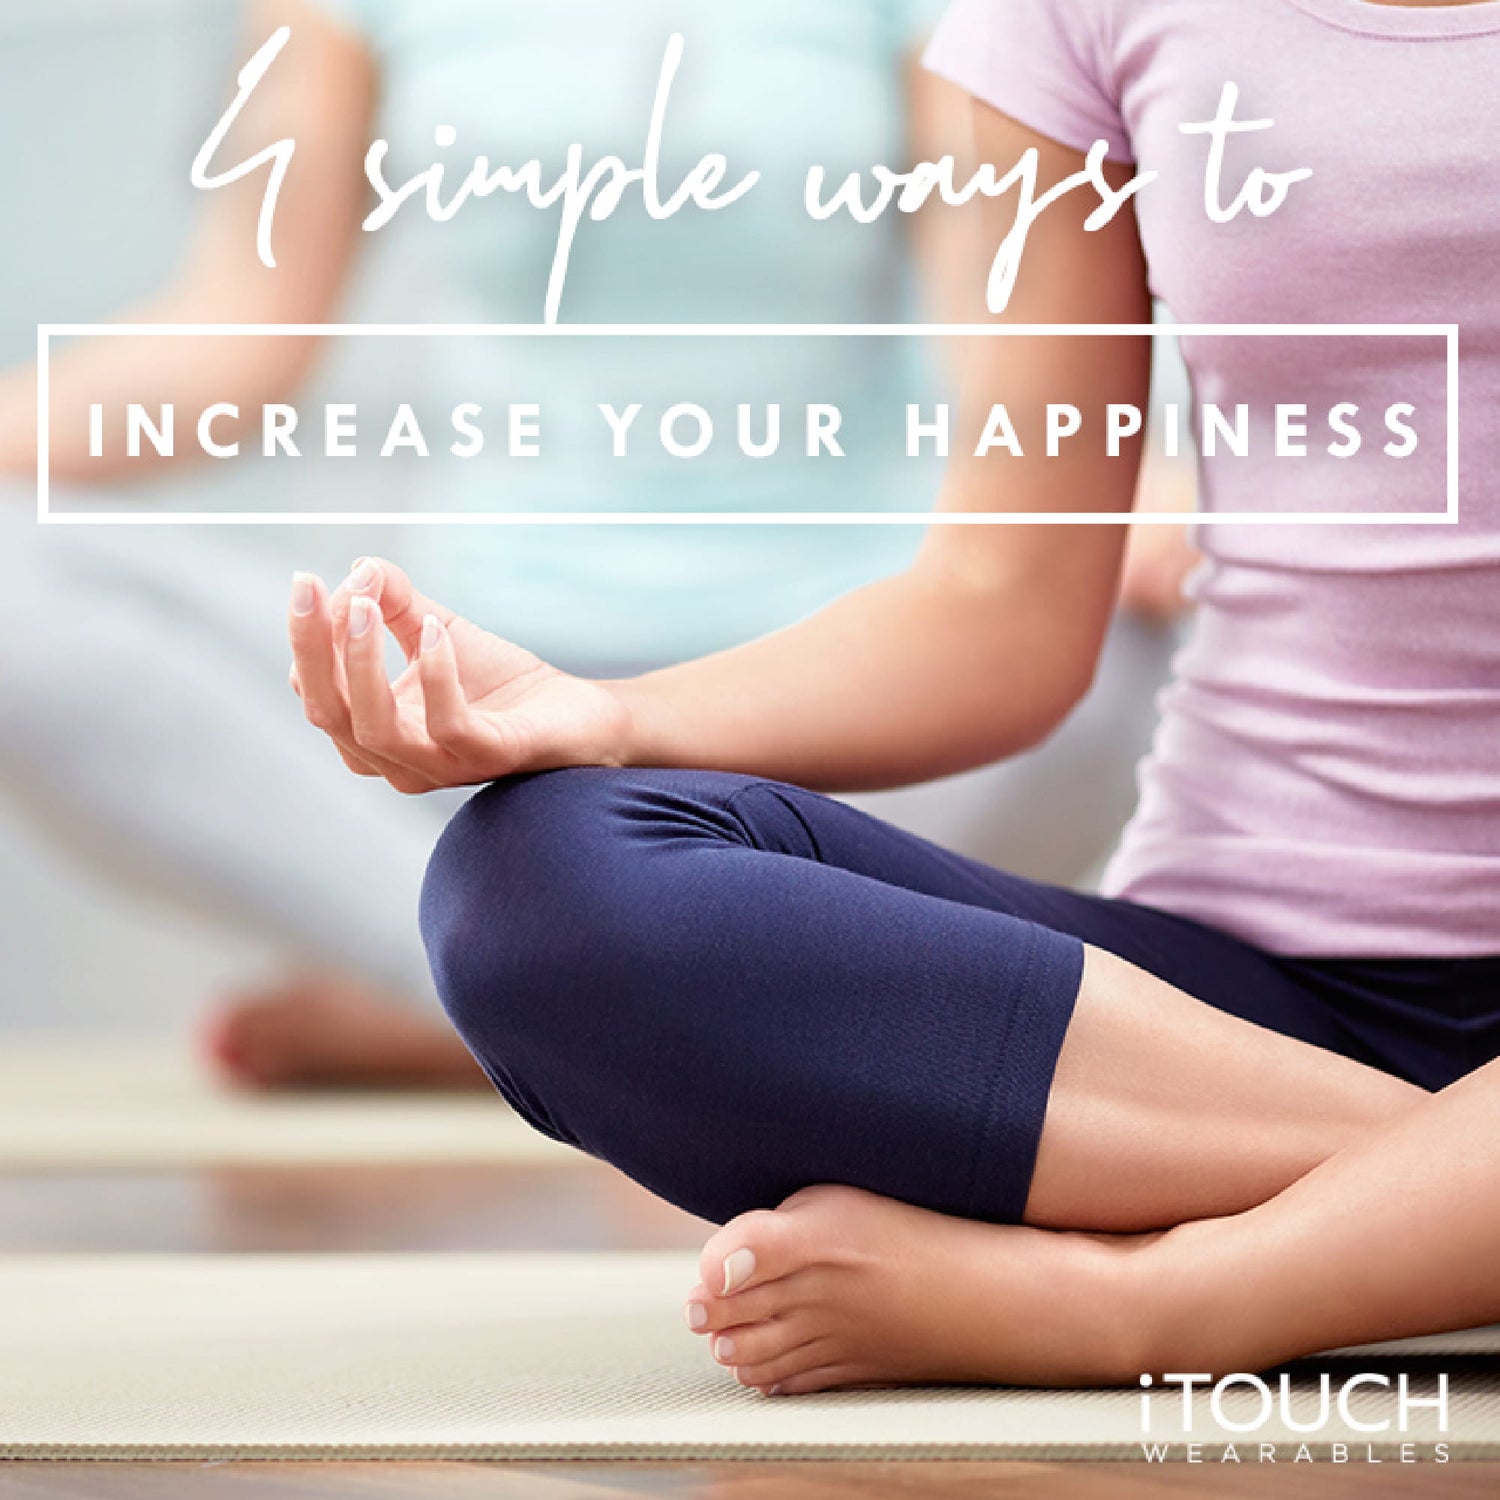 4 Simple Ways To Increase Your Happiness